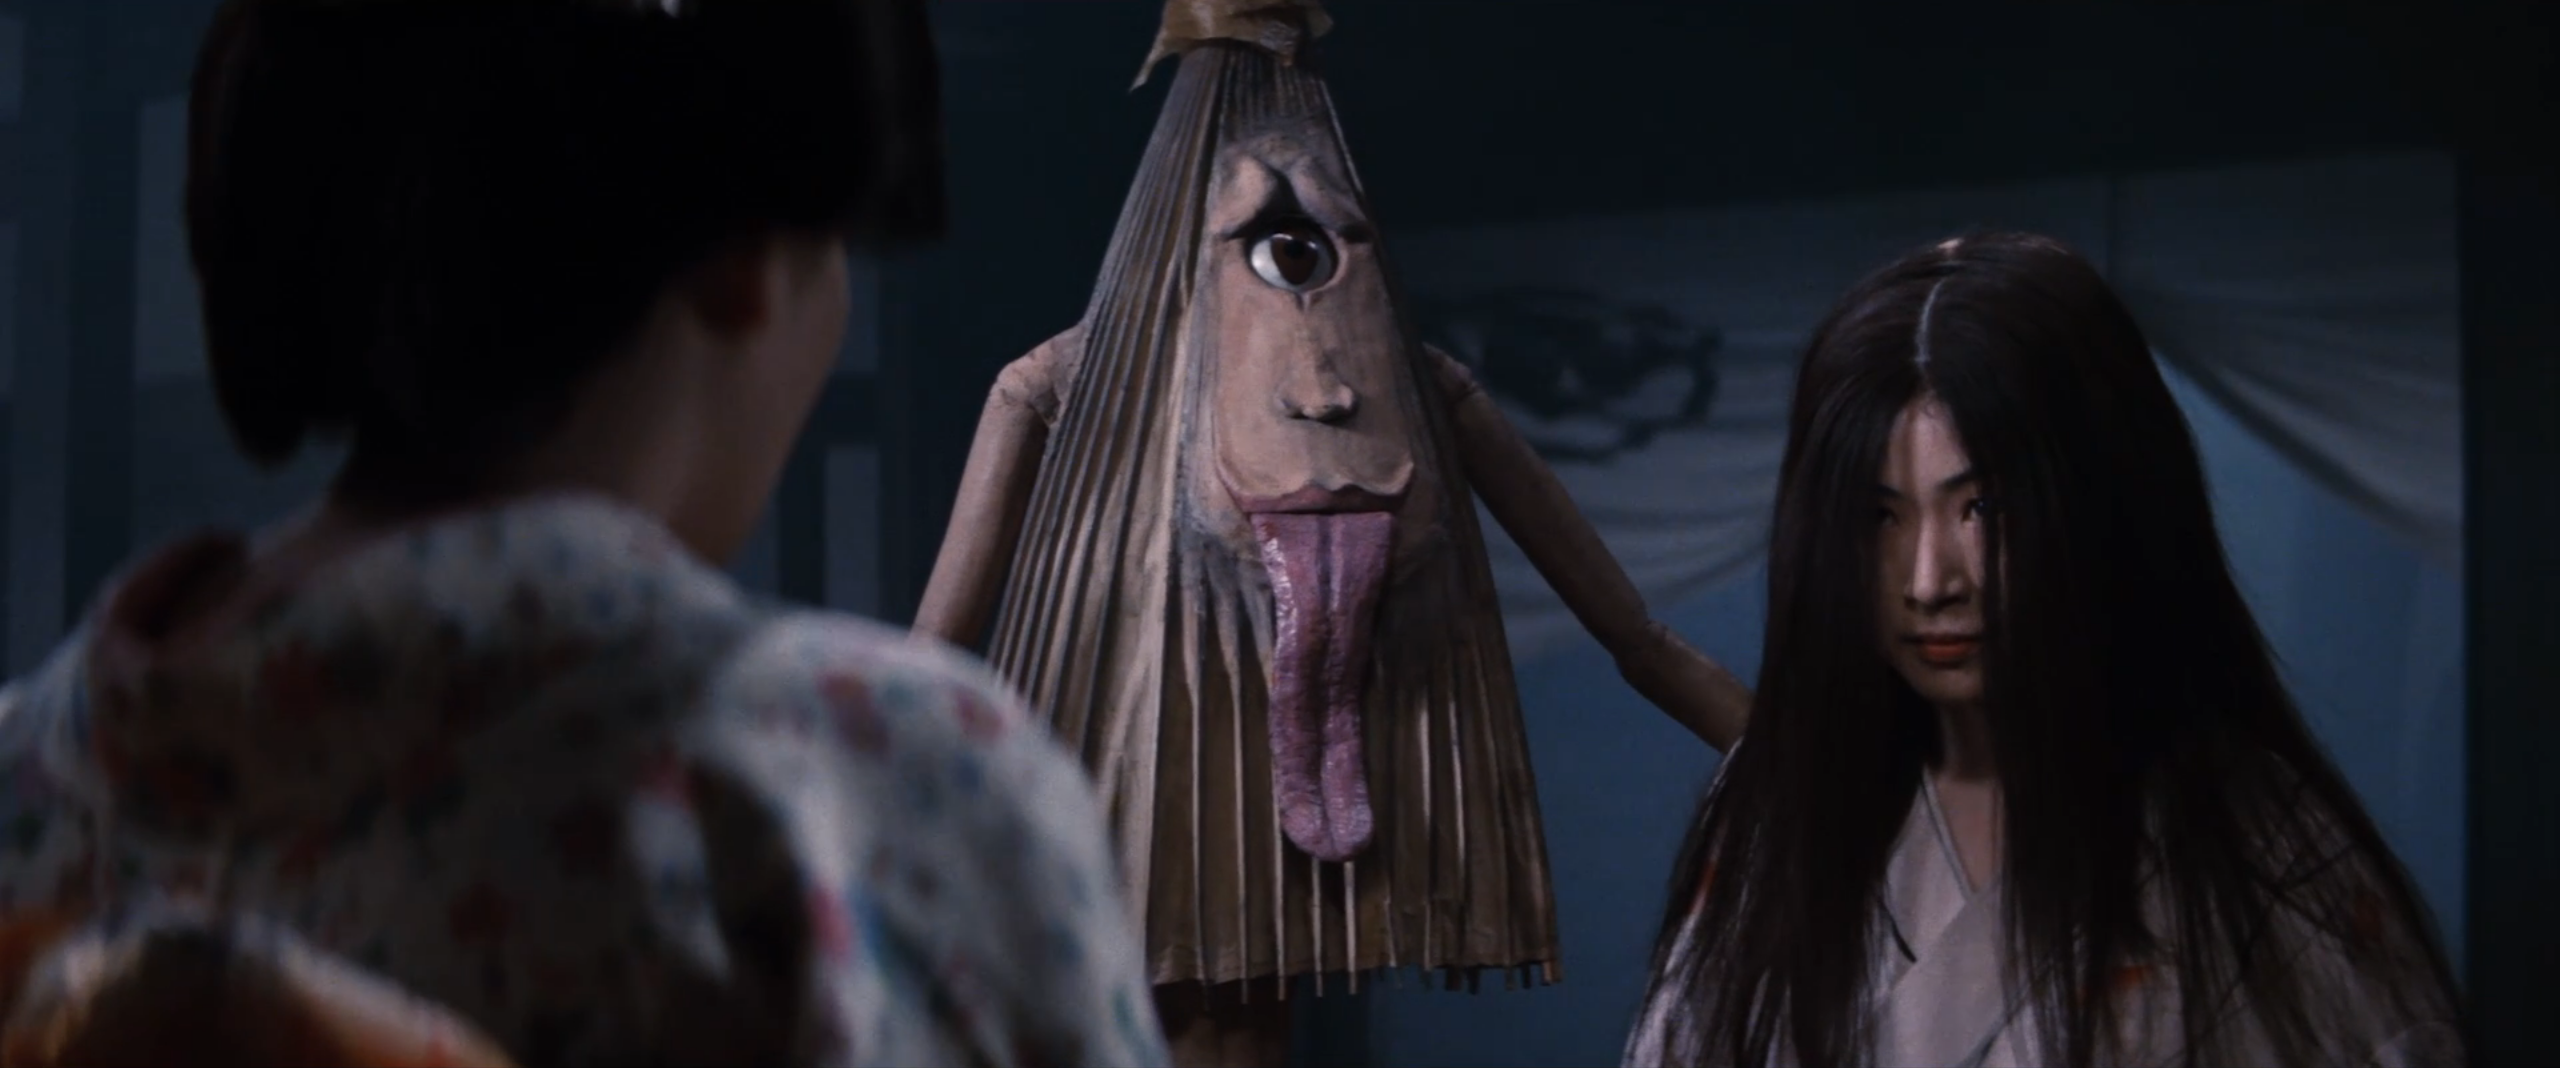 A cyclops umbrella monster, kasa-obake, appears beside a young woman's spirit in Spook Warfare